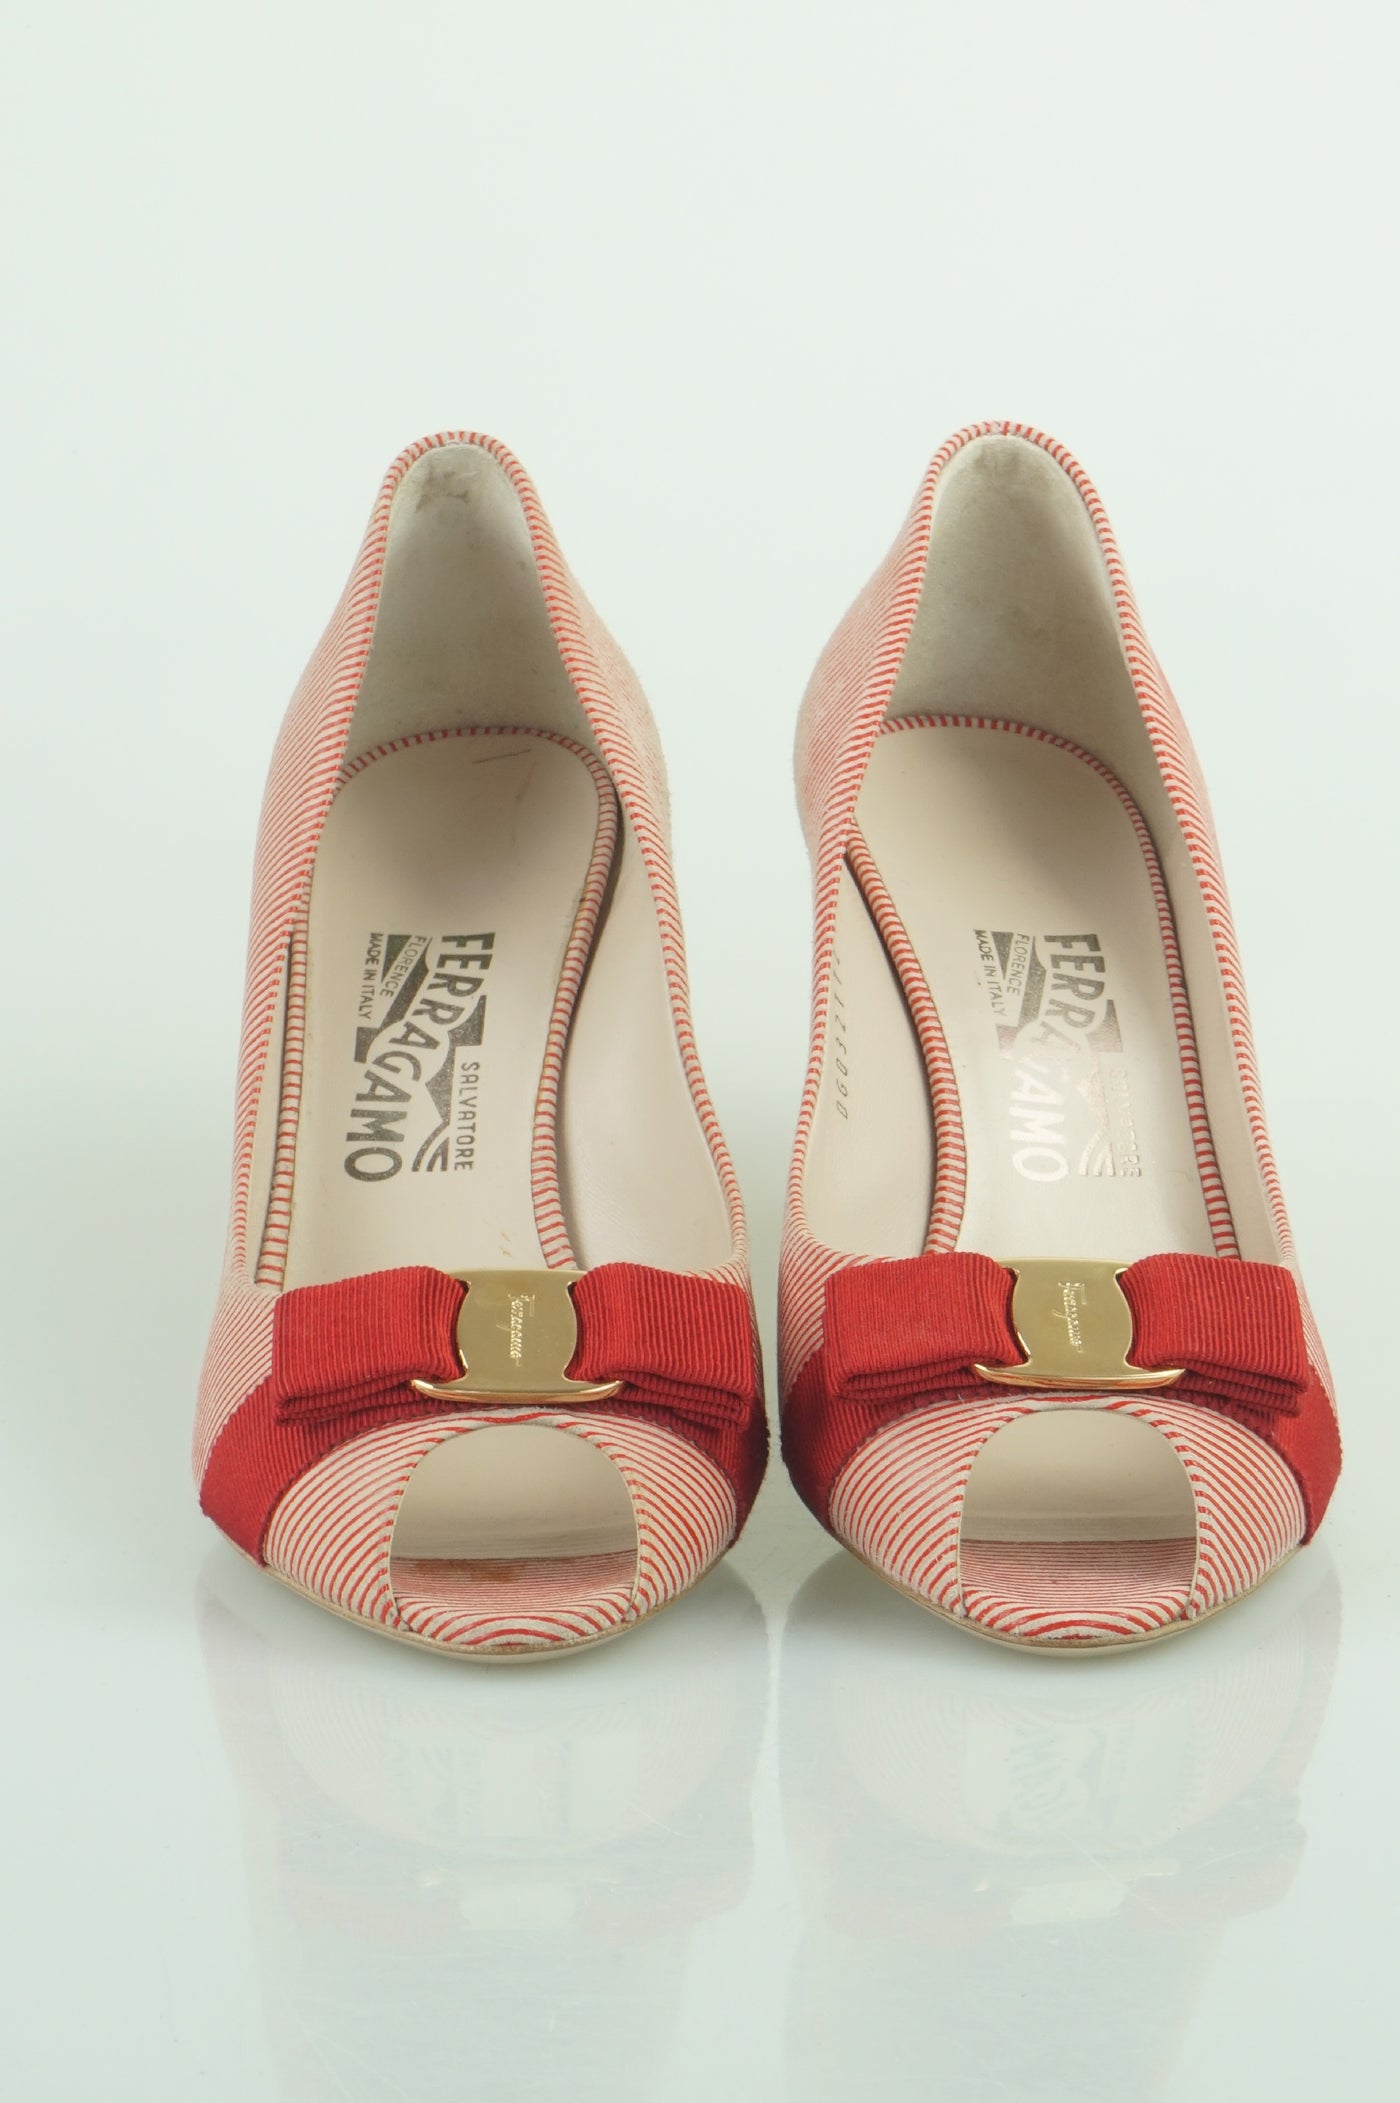 Ribes red and white pumps